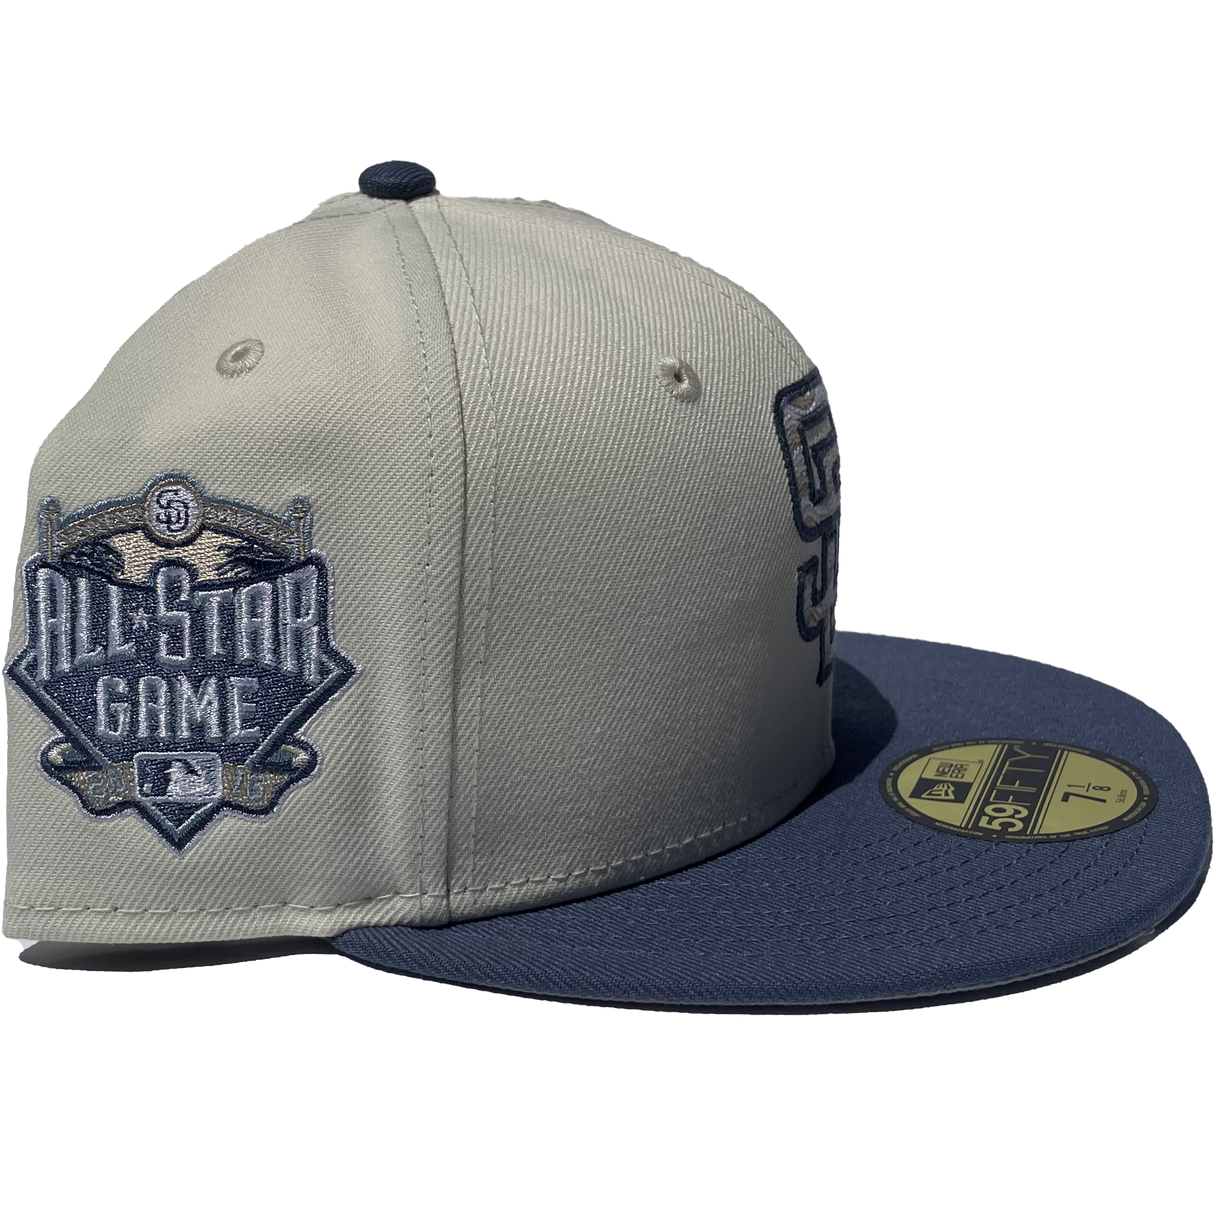 New Era San Diego Padres Wavy Chainstitch Cream & Slate 59Fifty Fitted Hat